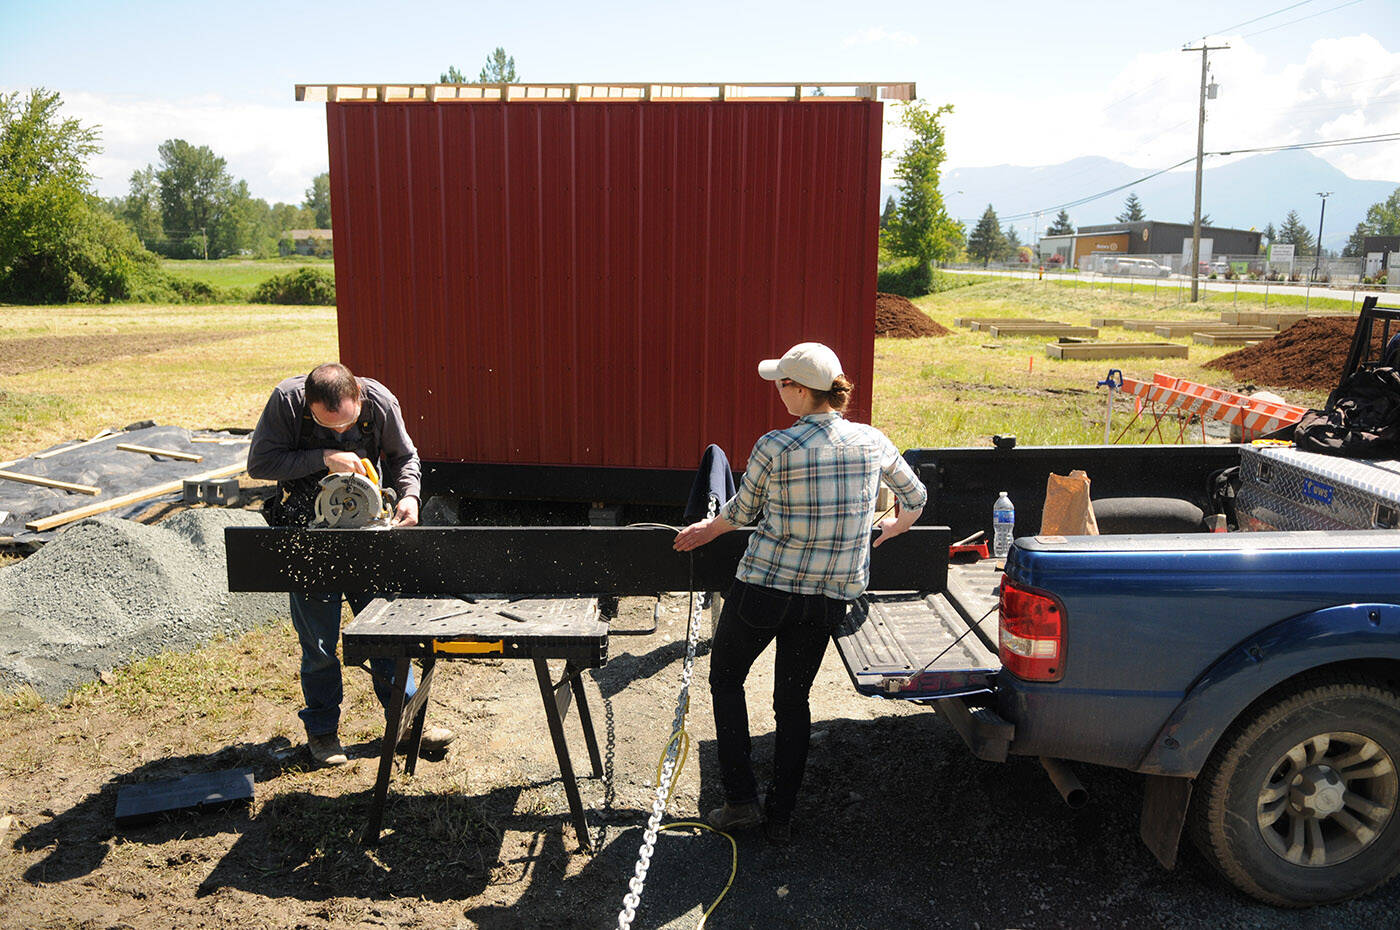 Stewart Fuoco, president of the UFV Agriculture Student Association and volunteer Julia Tuytel help build a shed at the new Bowls of Hope community garden on Wolfe Road on Friday, May 20, 2022. (Jenna Hauck/ Chilliwack Progress)